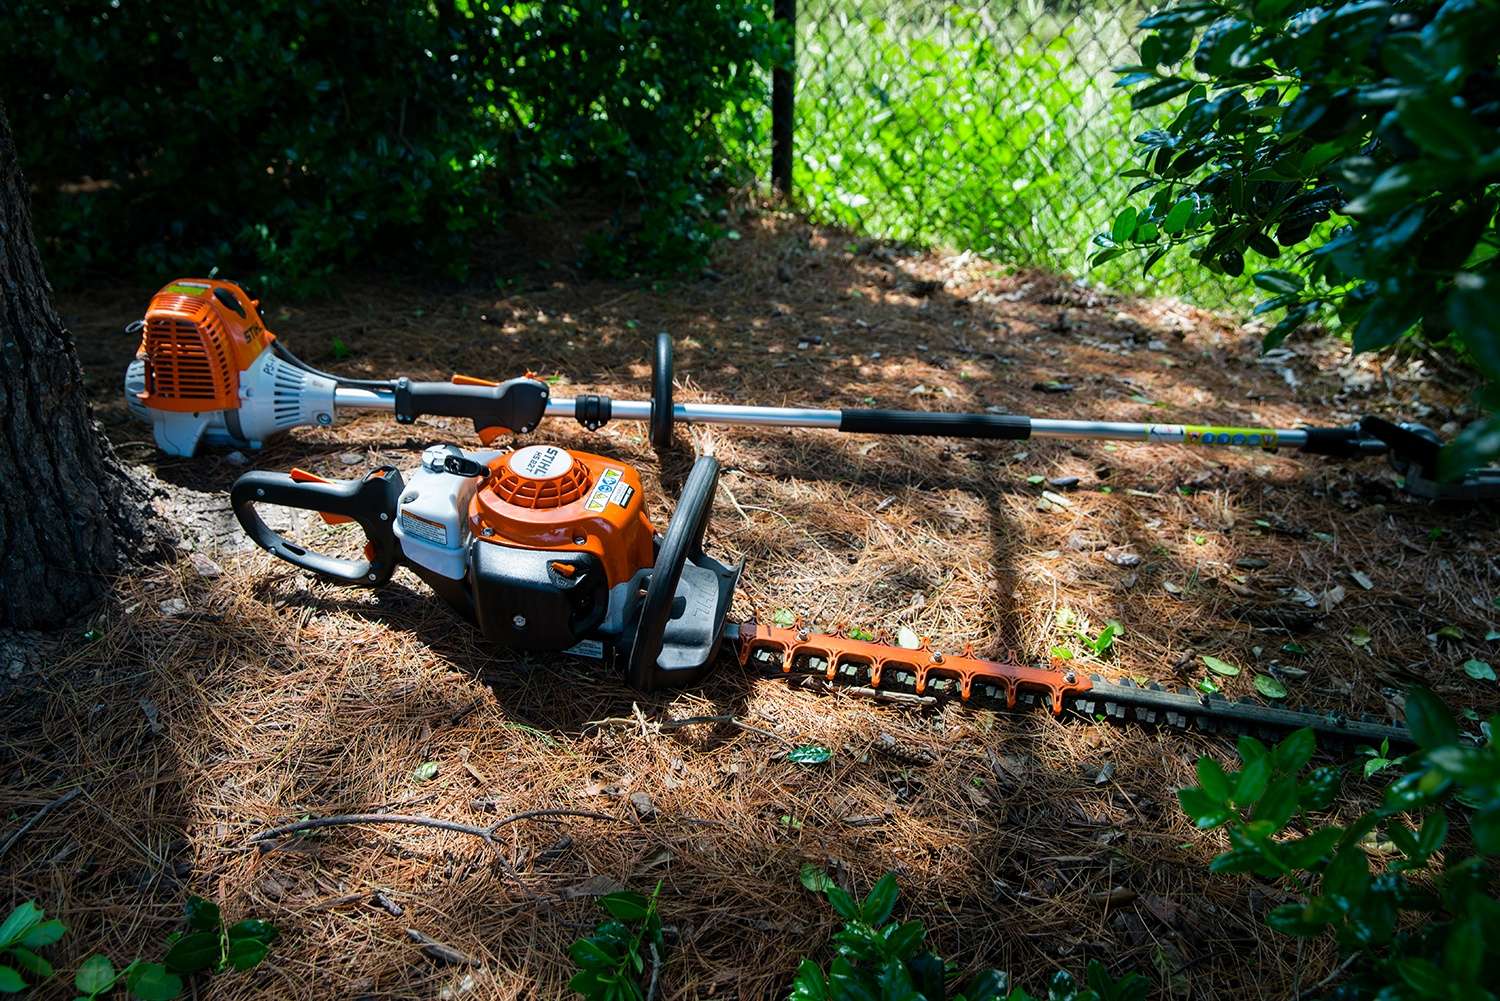 5 Challenges When Making the Change from Gas to Electric Landscaping Equipment